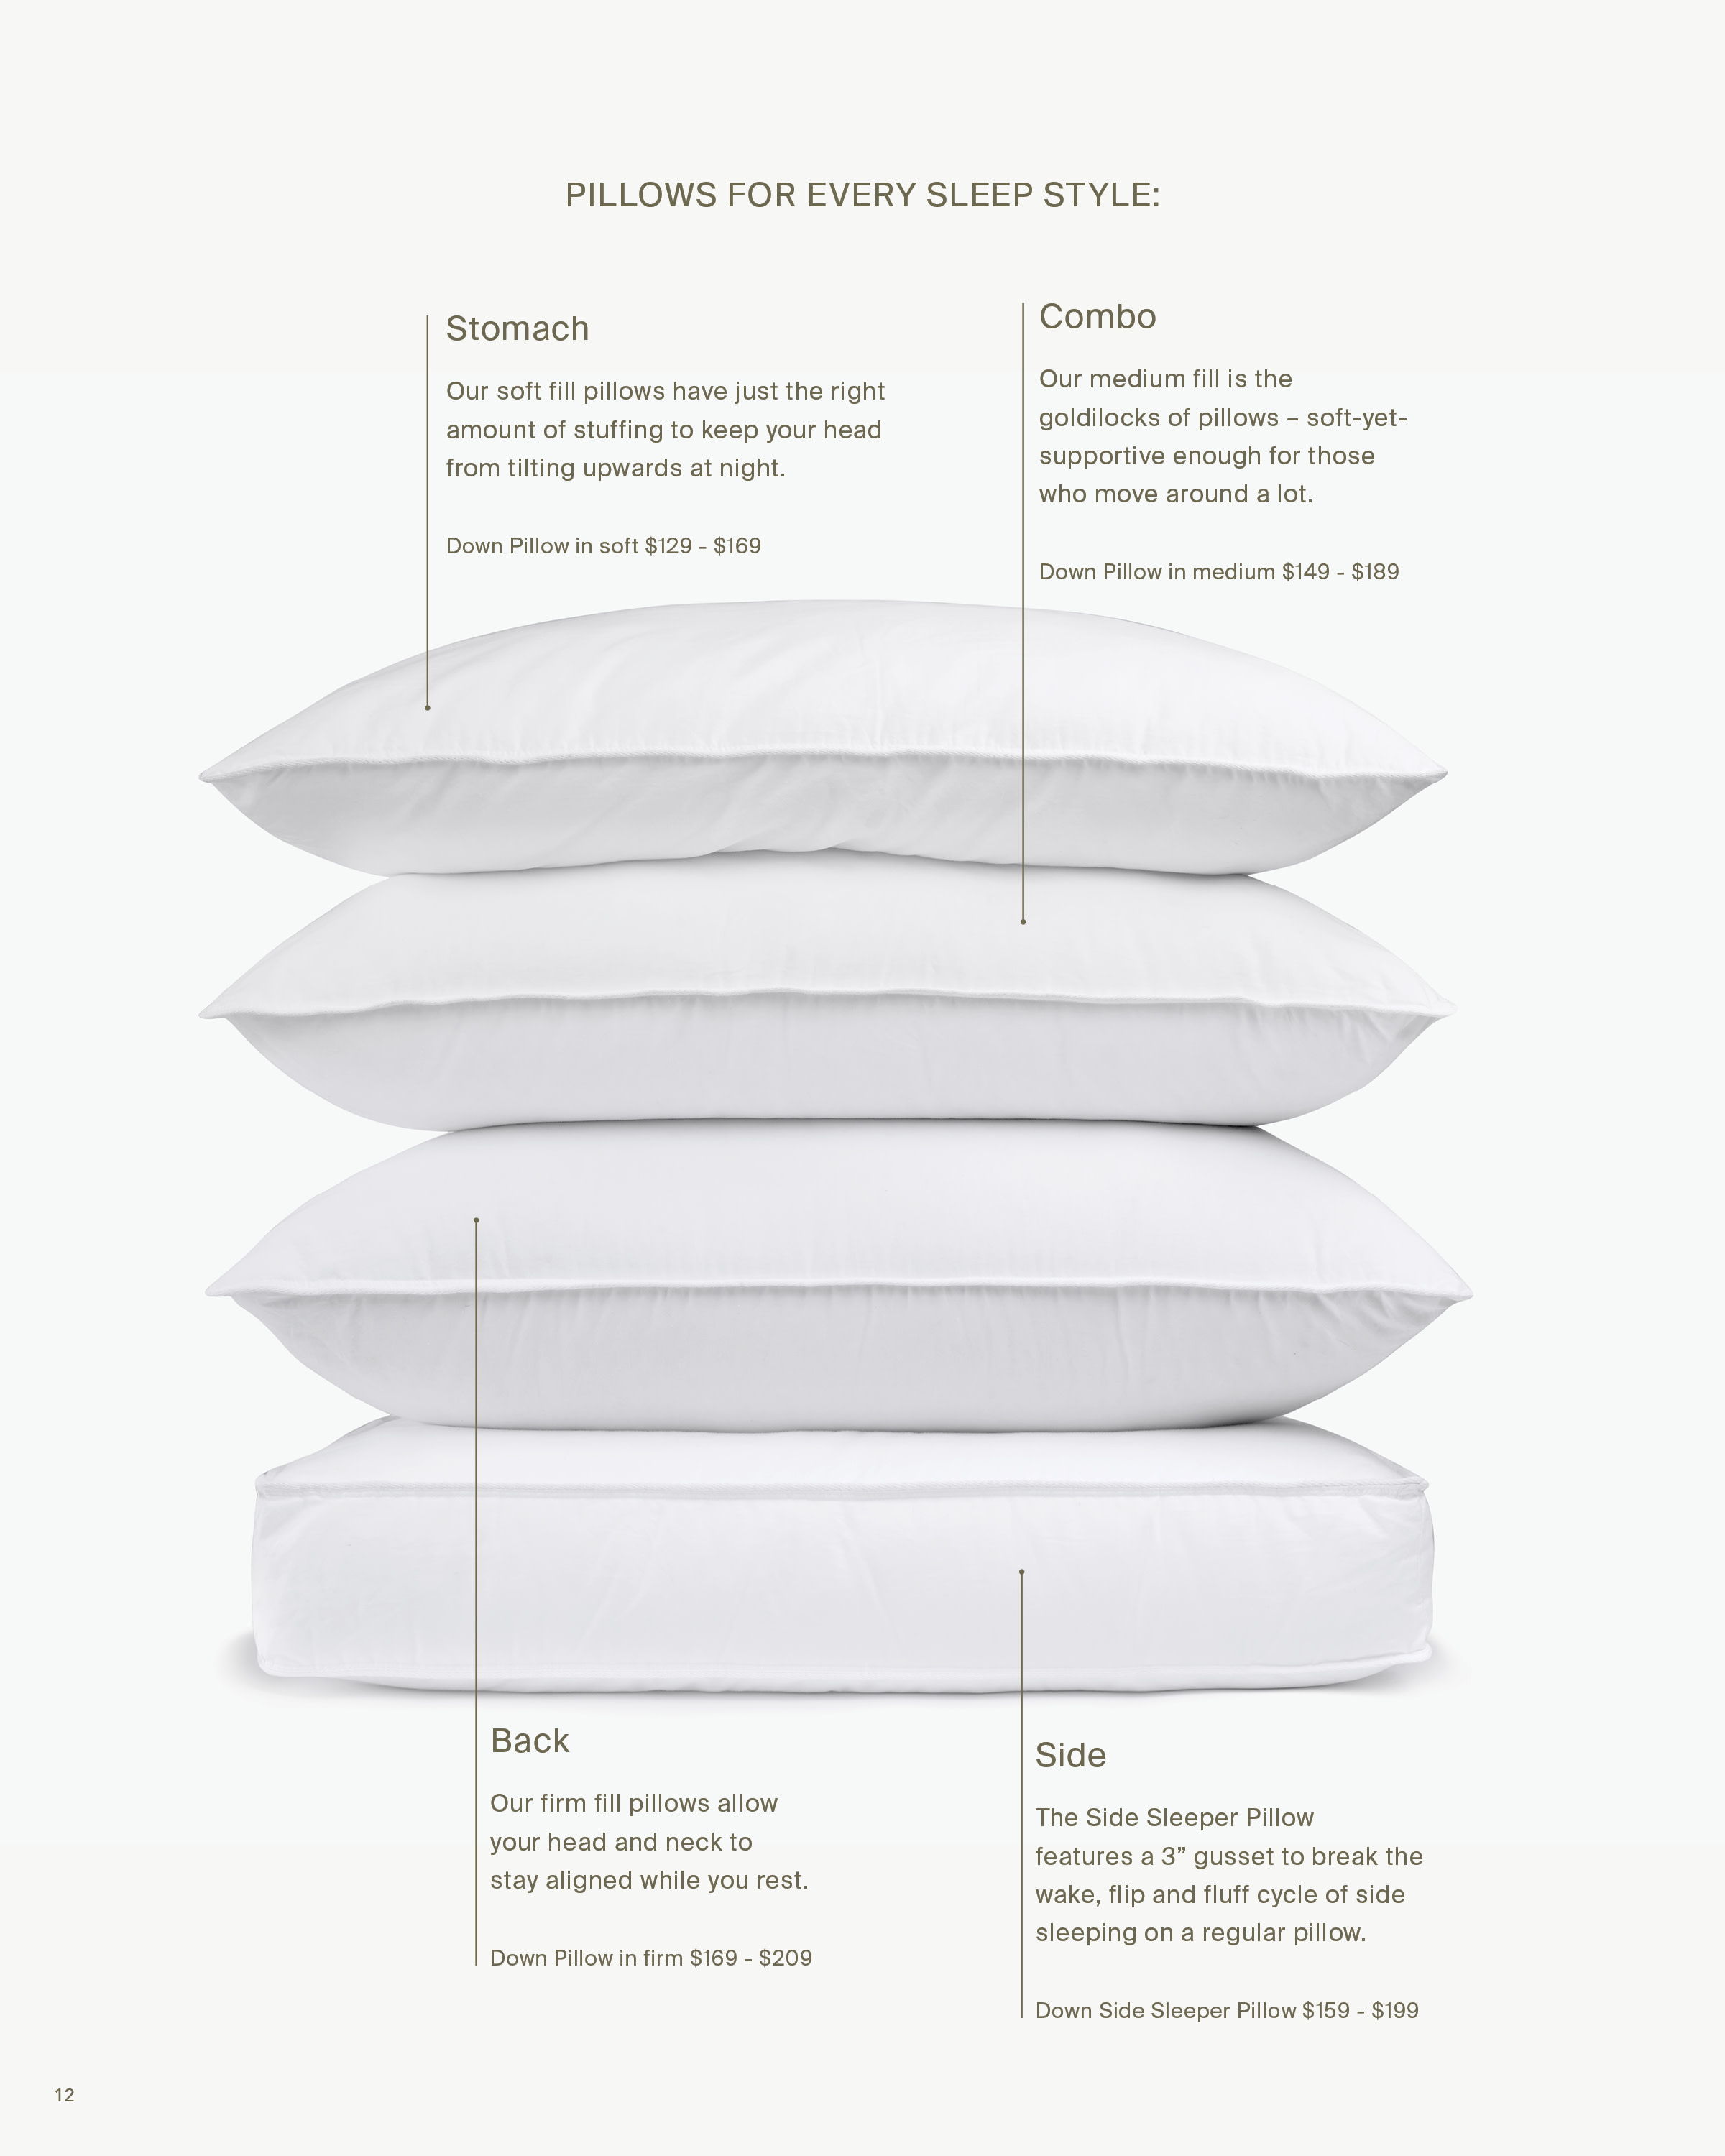 A photo demonstrating the different firmness levels of Parachute pillows.